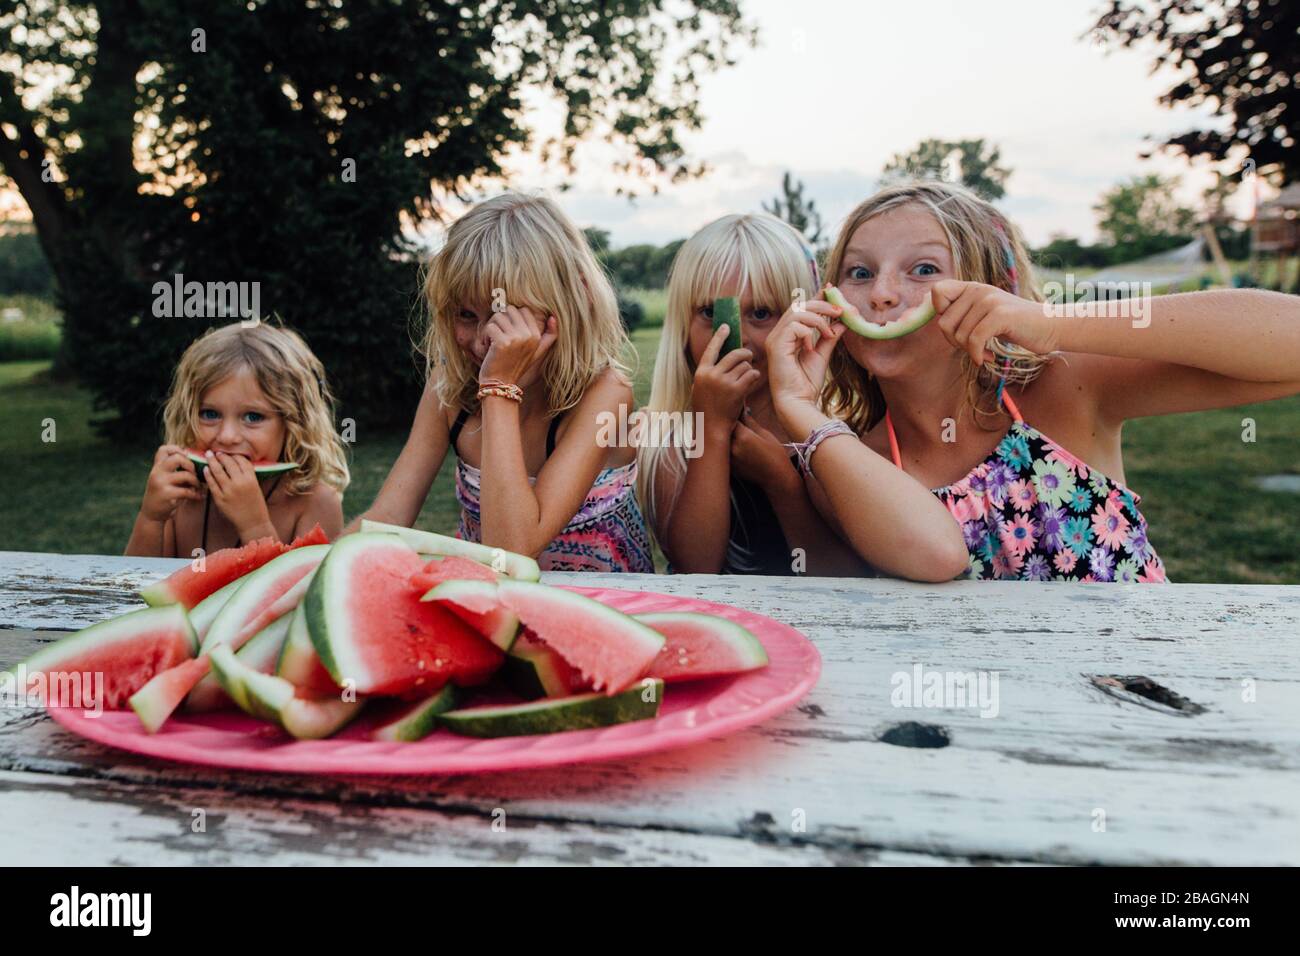 Young kids having fun eating watermelon outside laughing in the summer Stock Photo